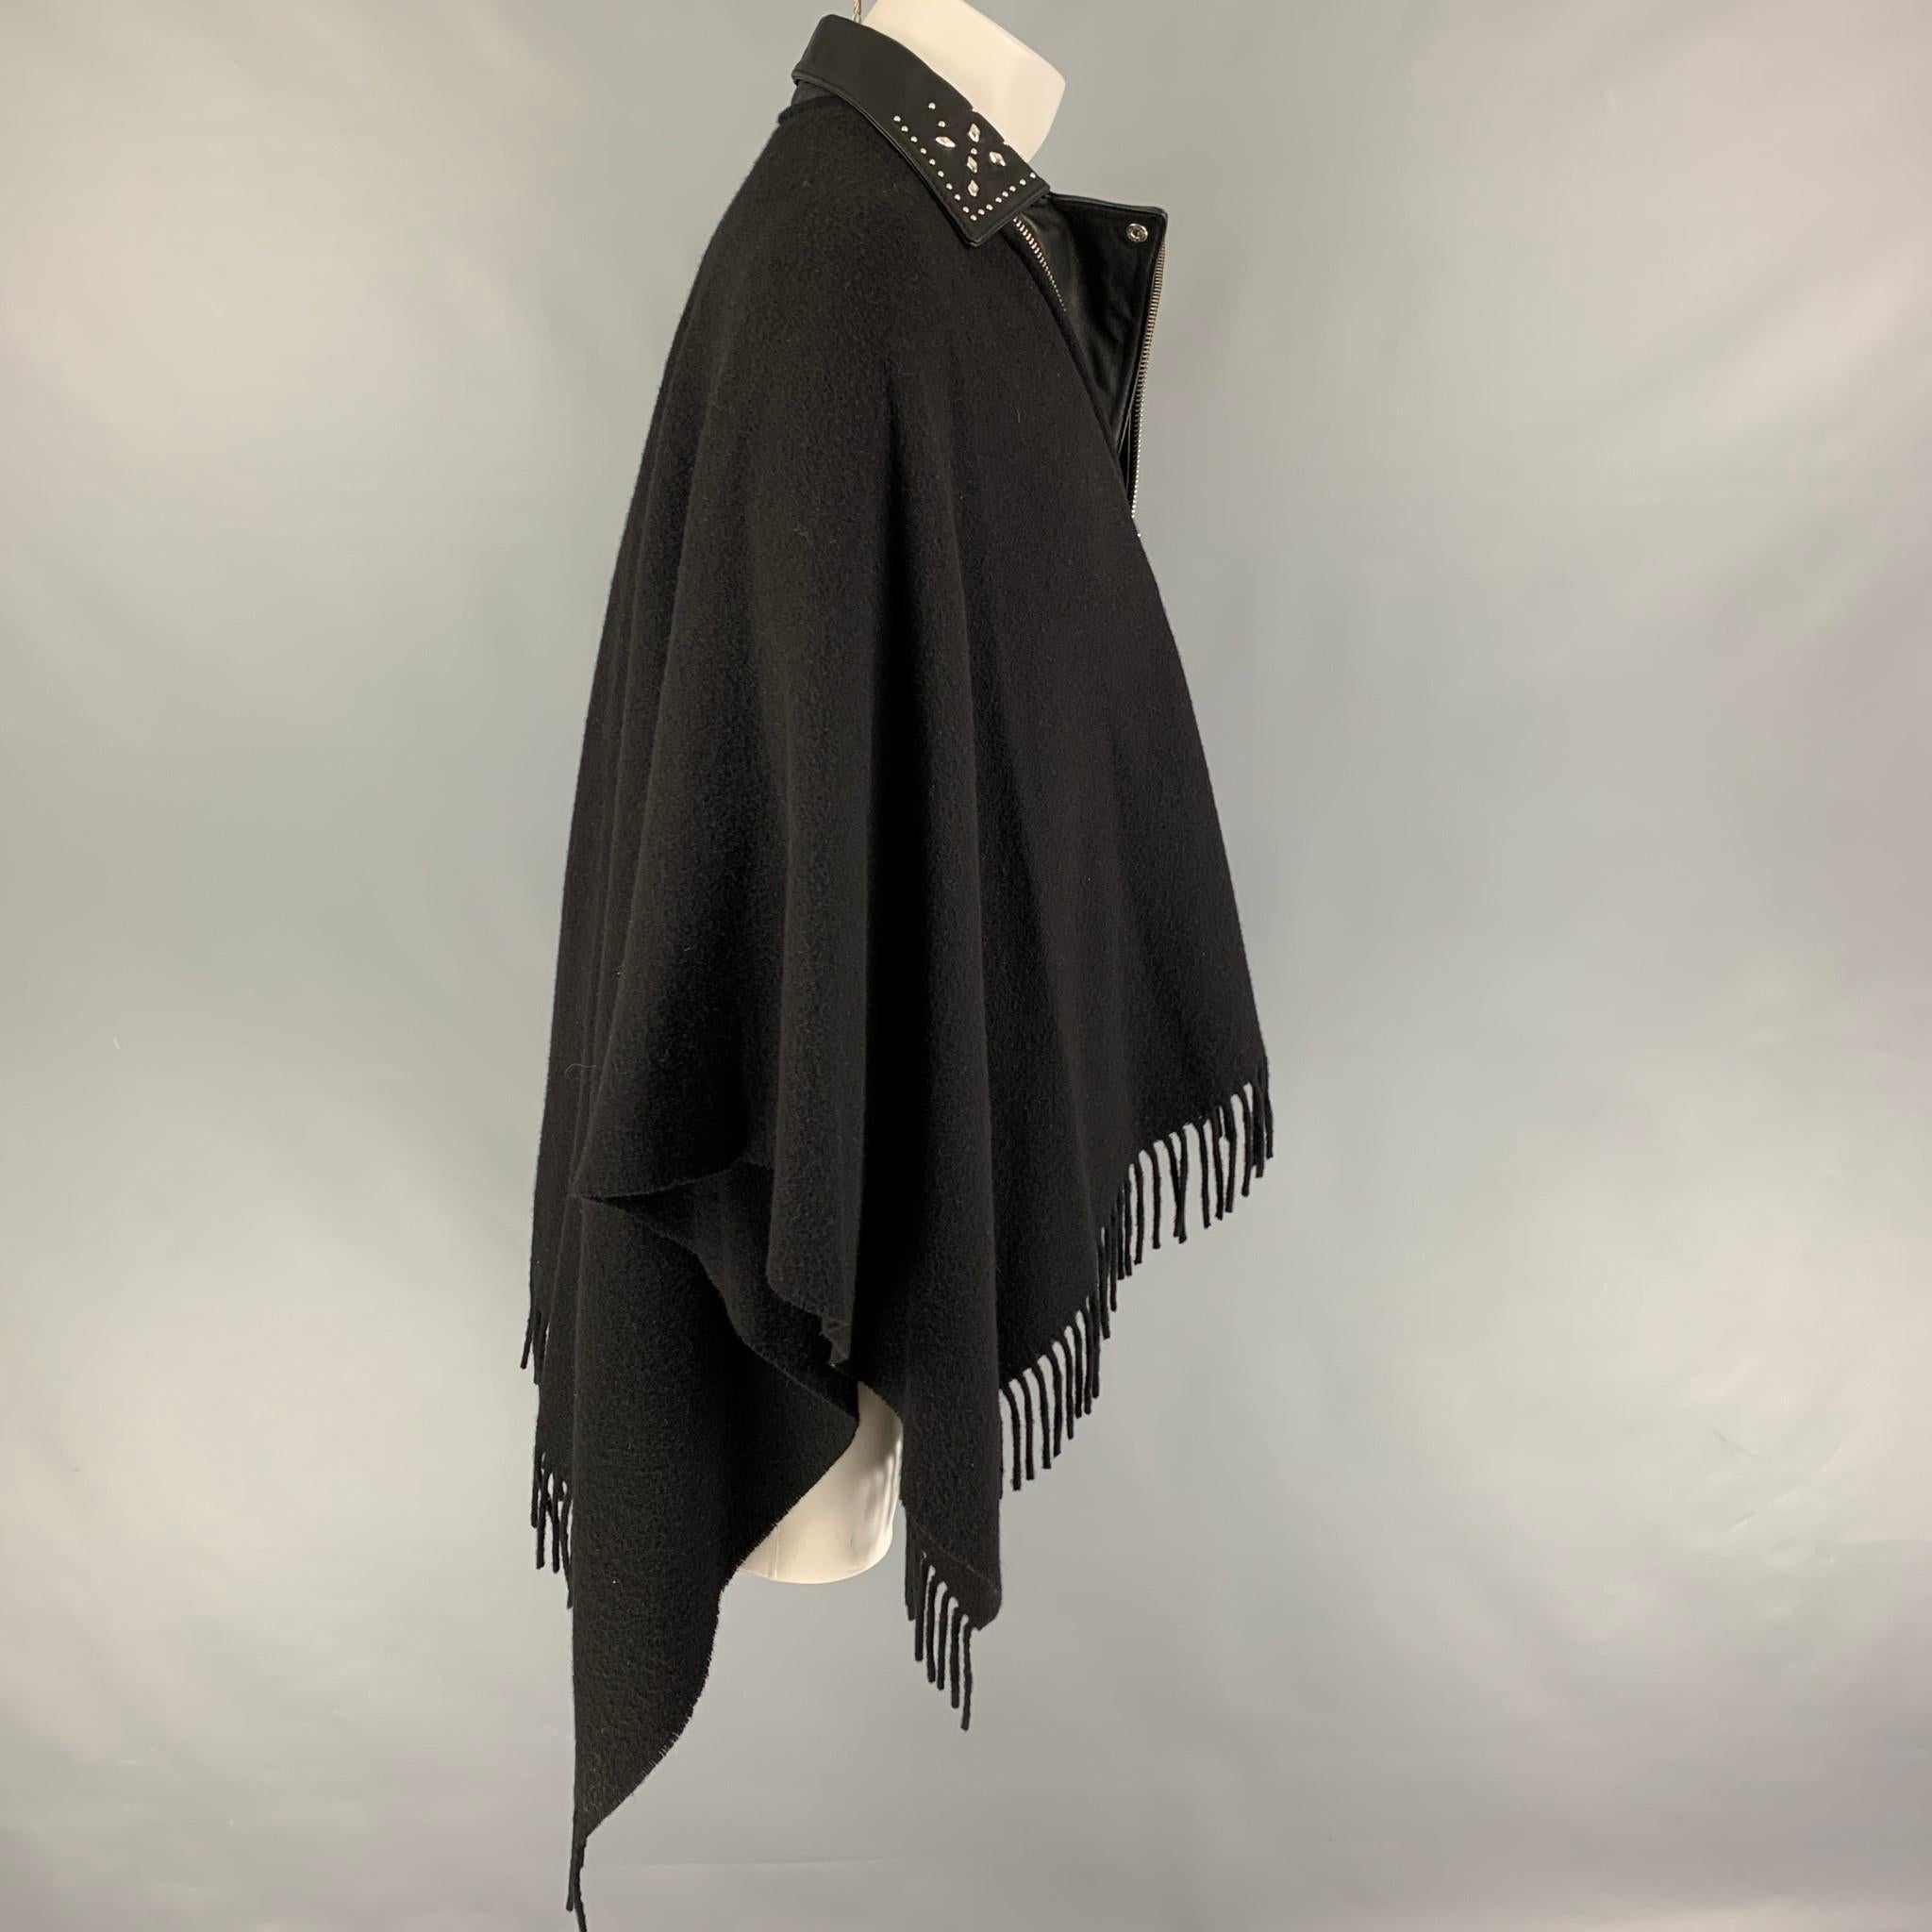 THE KOOPLES coat comes in a black wool featuring a leather trim, studded collar design, fringe trim, and a zip up closure. 

Very Good Pre-Owned Condition.
Marked: One Size

Measurements:

Length: 33.5 in. 